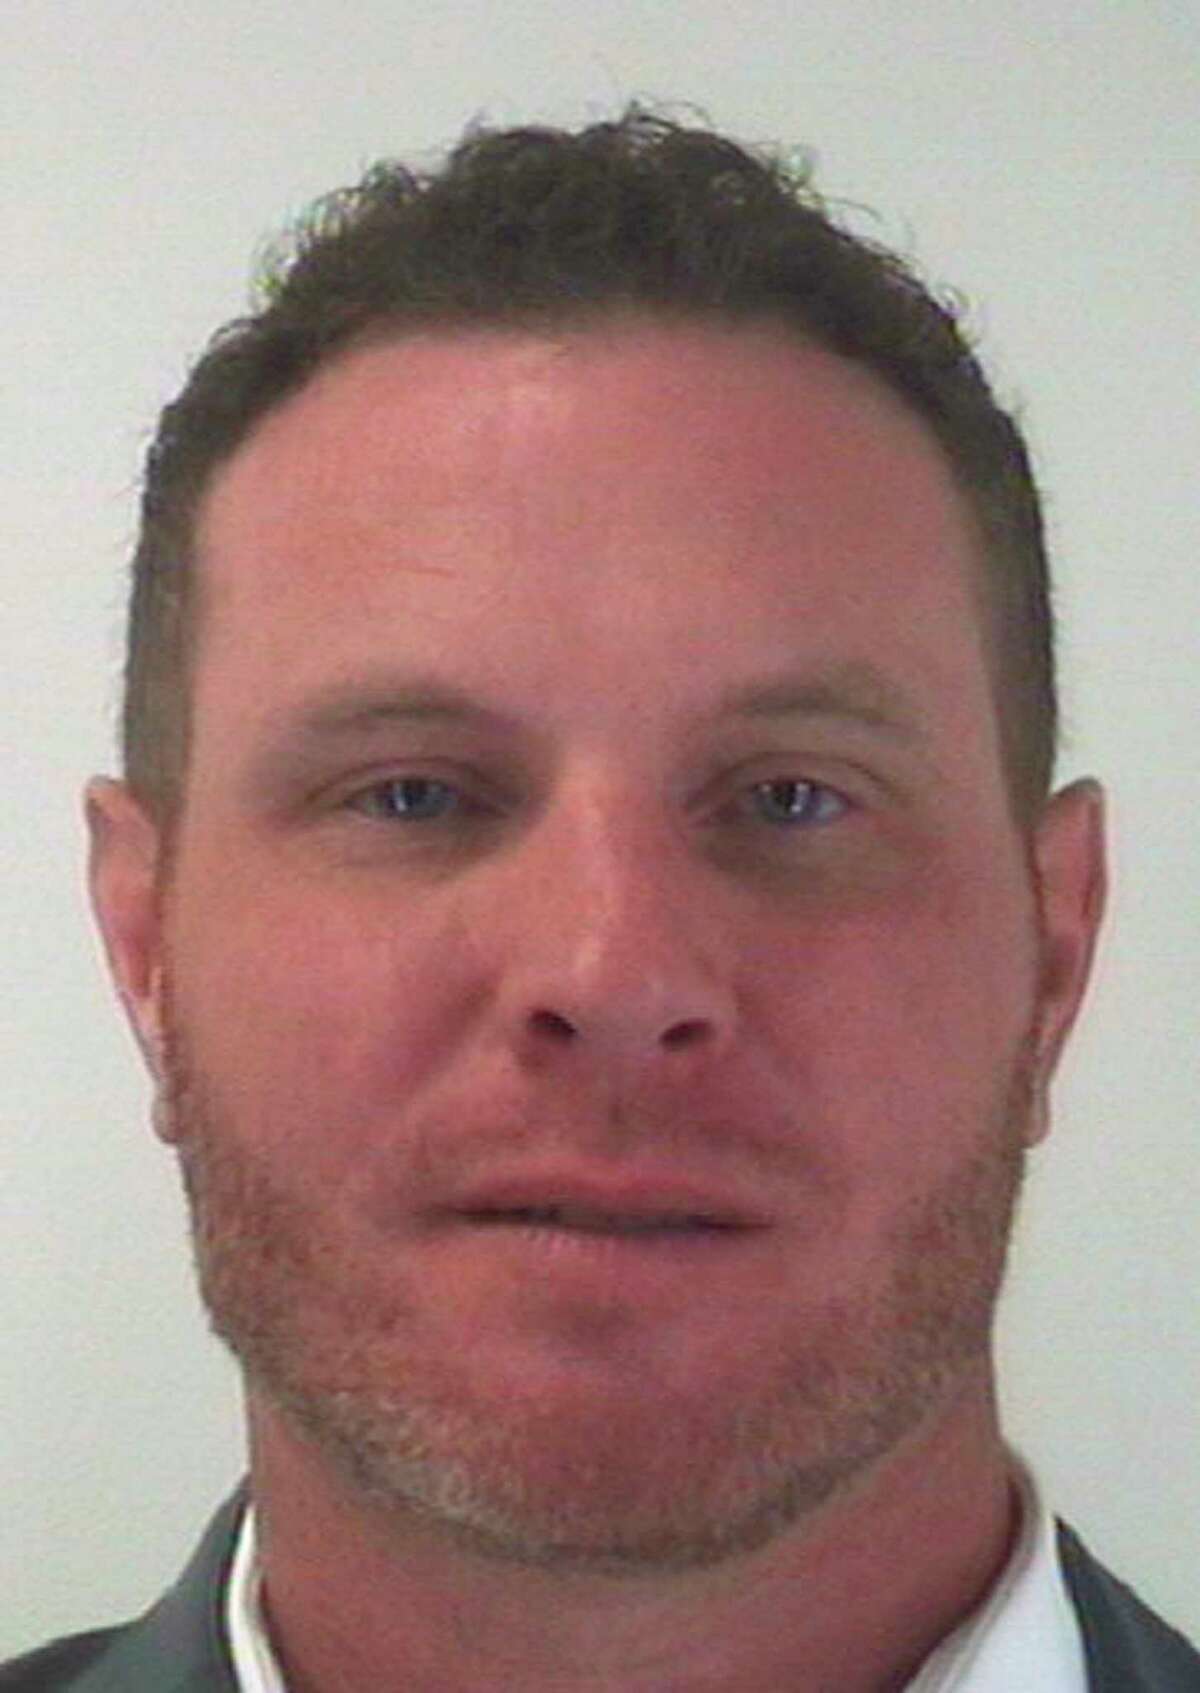 This undated photo provided by the Tarrant County Sheriff's Department in Fort Worth, Texas shows Josh Hamilton, a former Major League Baseball player with the Texas Rangers who was arrested Wednesday, Oct. 30, 2019 and charged with injury to a child after his 14-year-old daughter told his ex-wife that he'd struck her. Hamilton turned himself in Wednesday to the Tarrant County Jail in Fort Worth, Texas, and was released on $35,000 bond. (Tarrant County Sheriff's Department via AP)